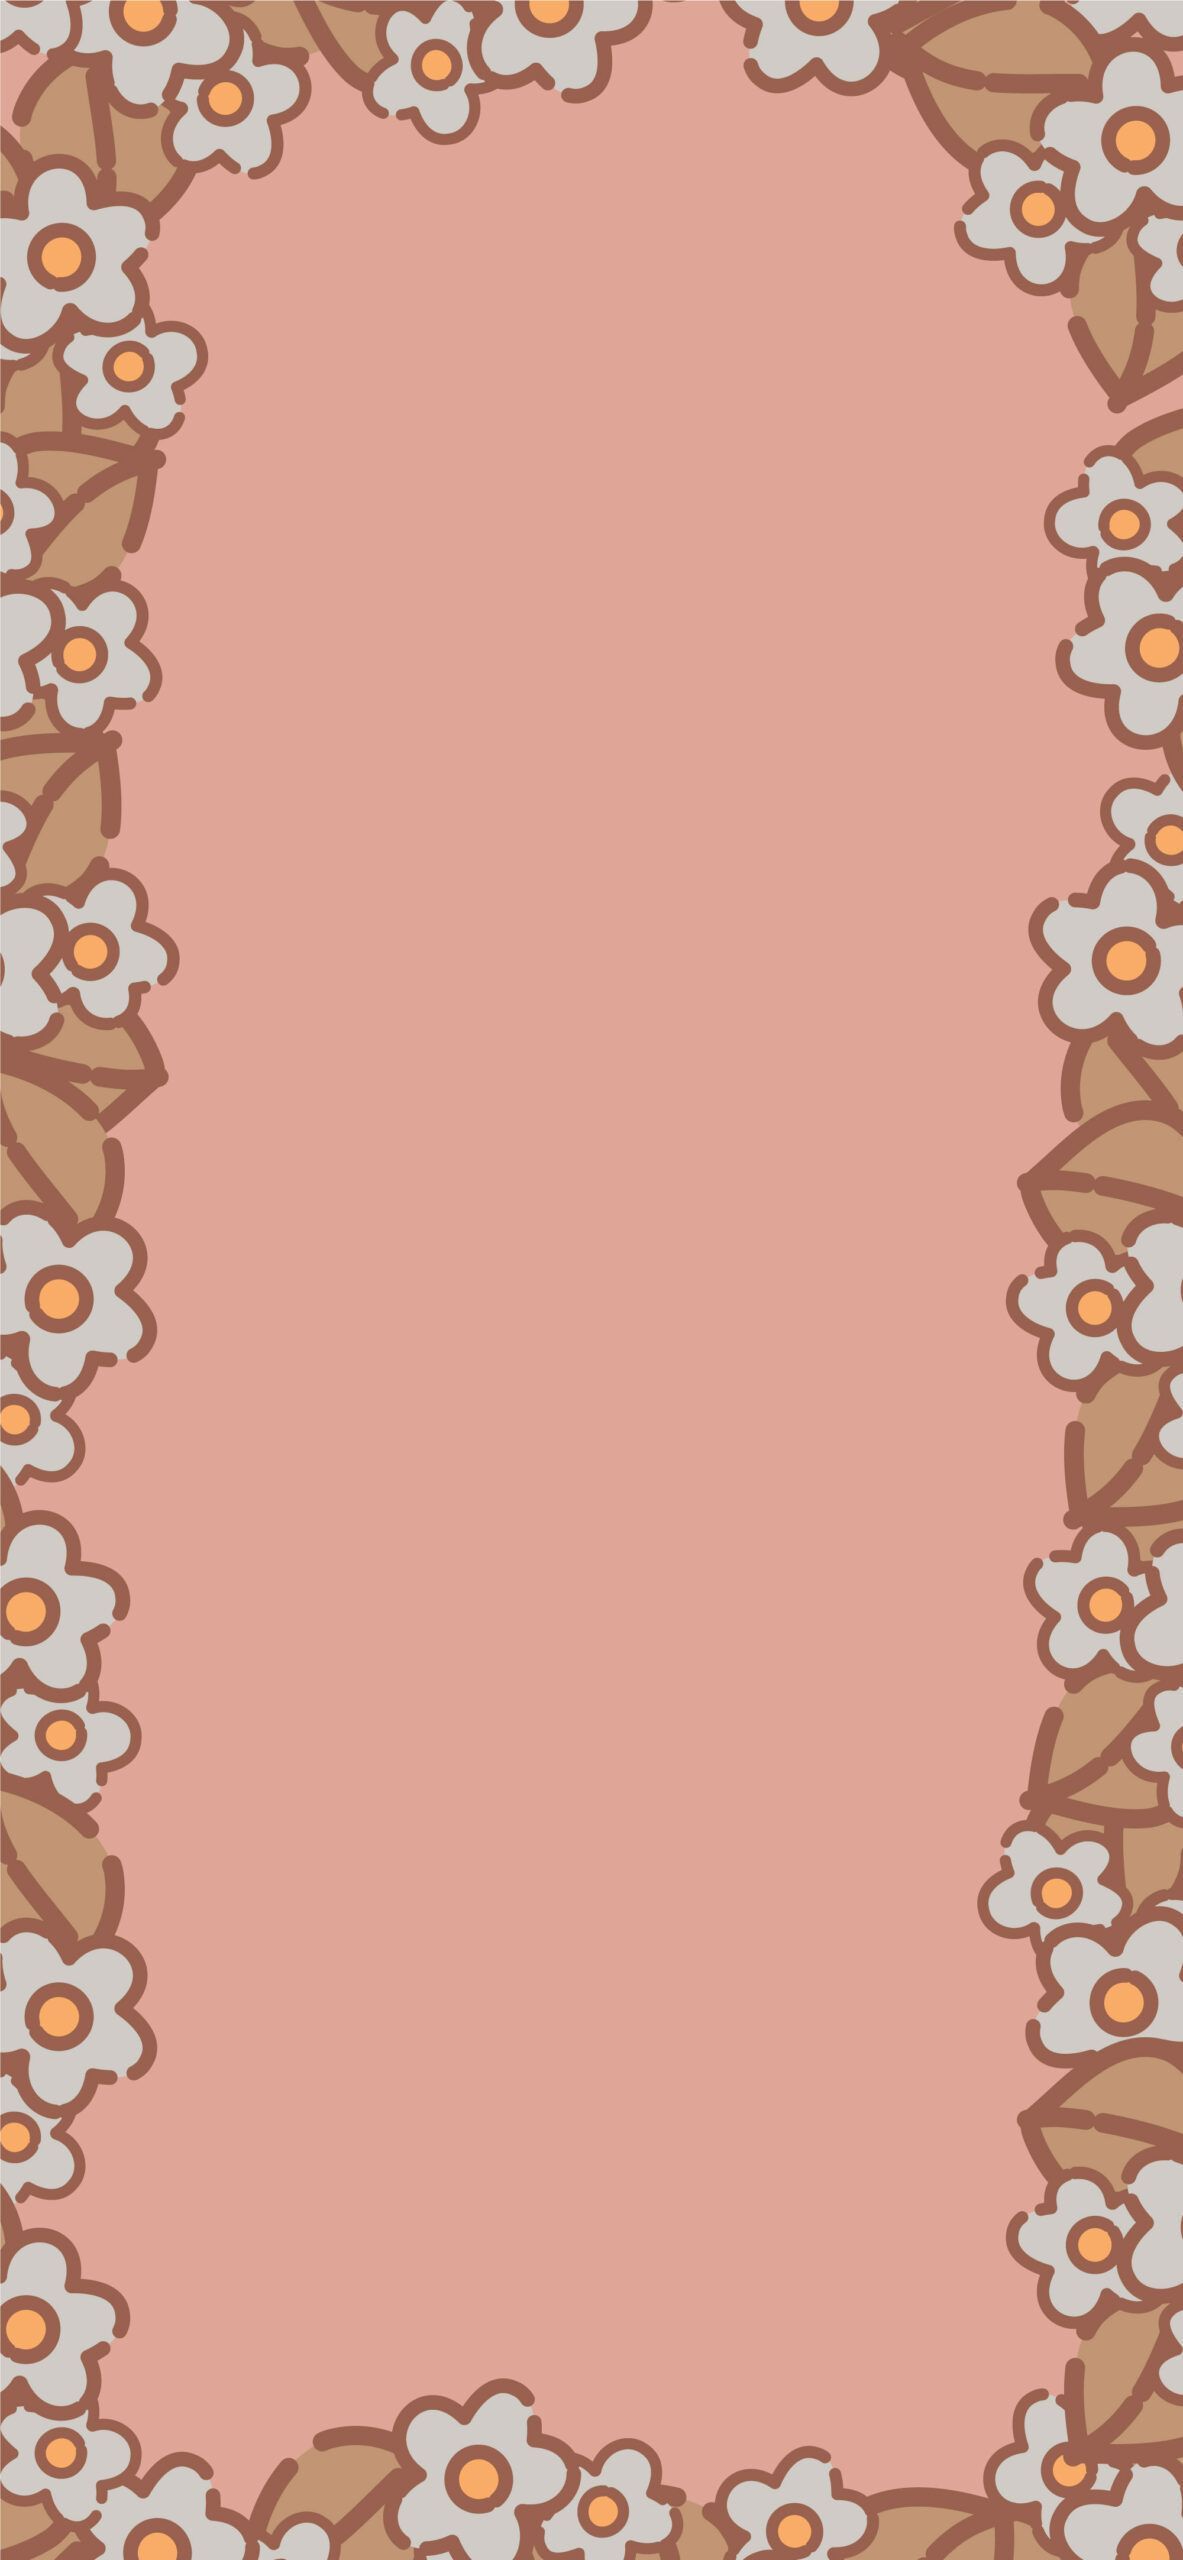 Cute Aesthetic Cottagecore Wallpaper for Phone